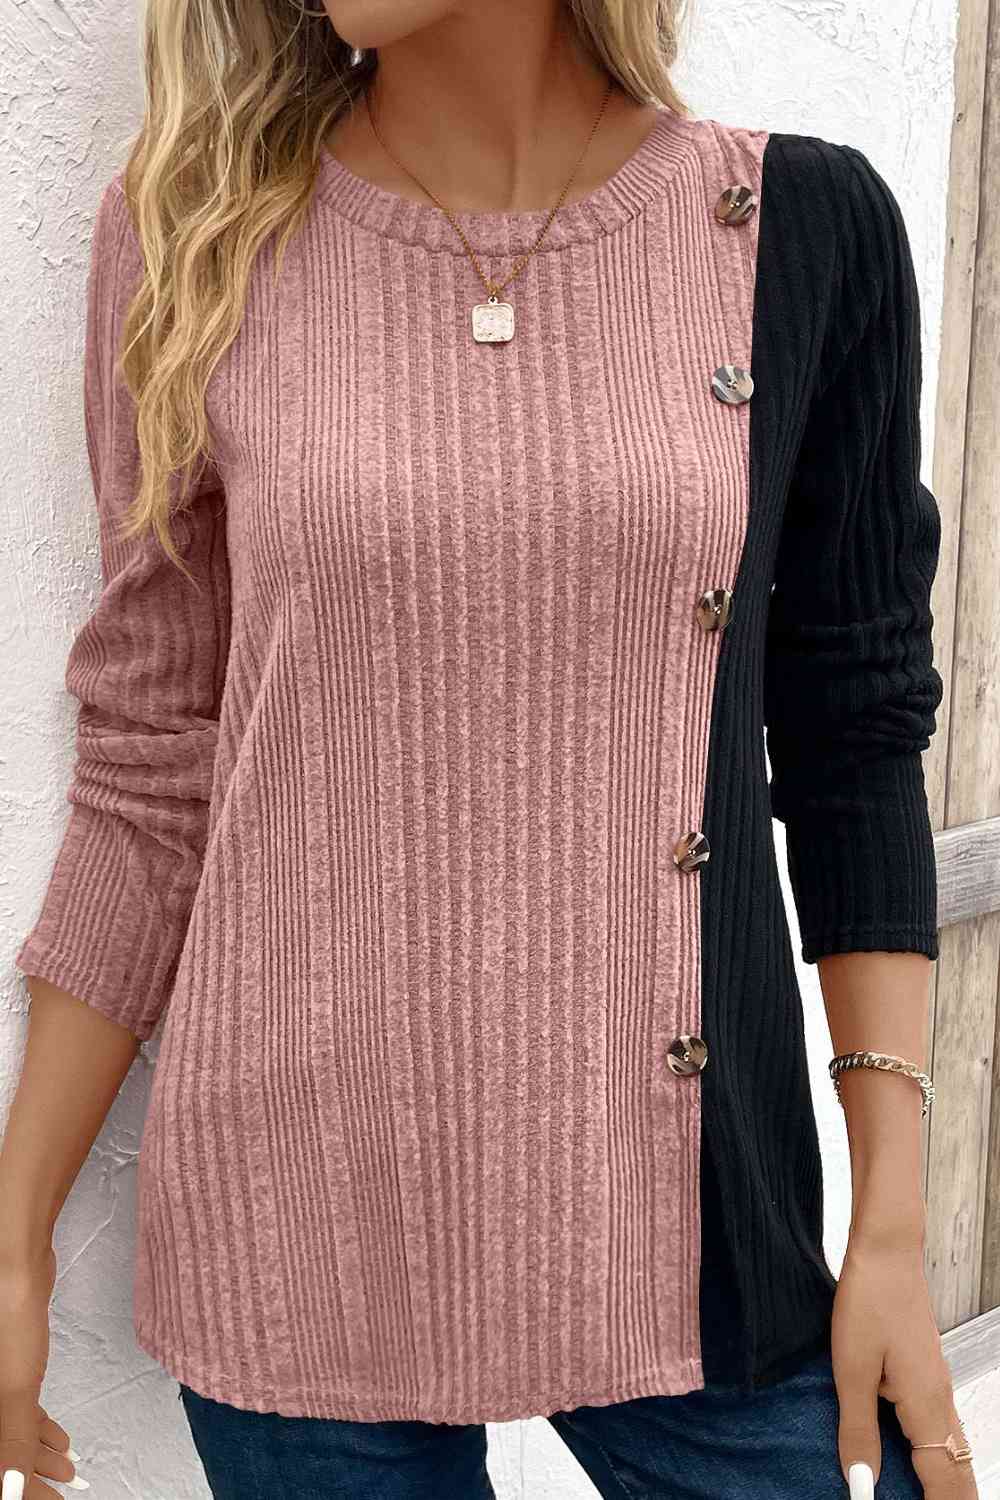 Contrast Color Long Sleeve Knit Top (6 Colors) Shirts & Tops Krazy Heart Designs Boutique Dusty Pink S 